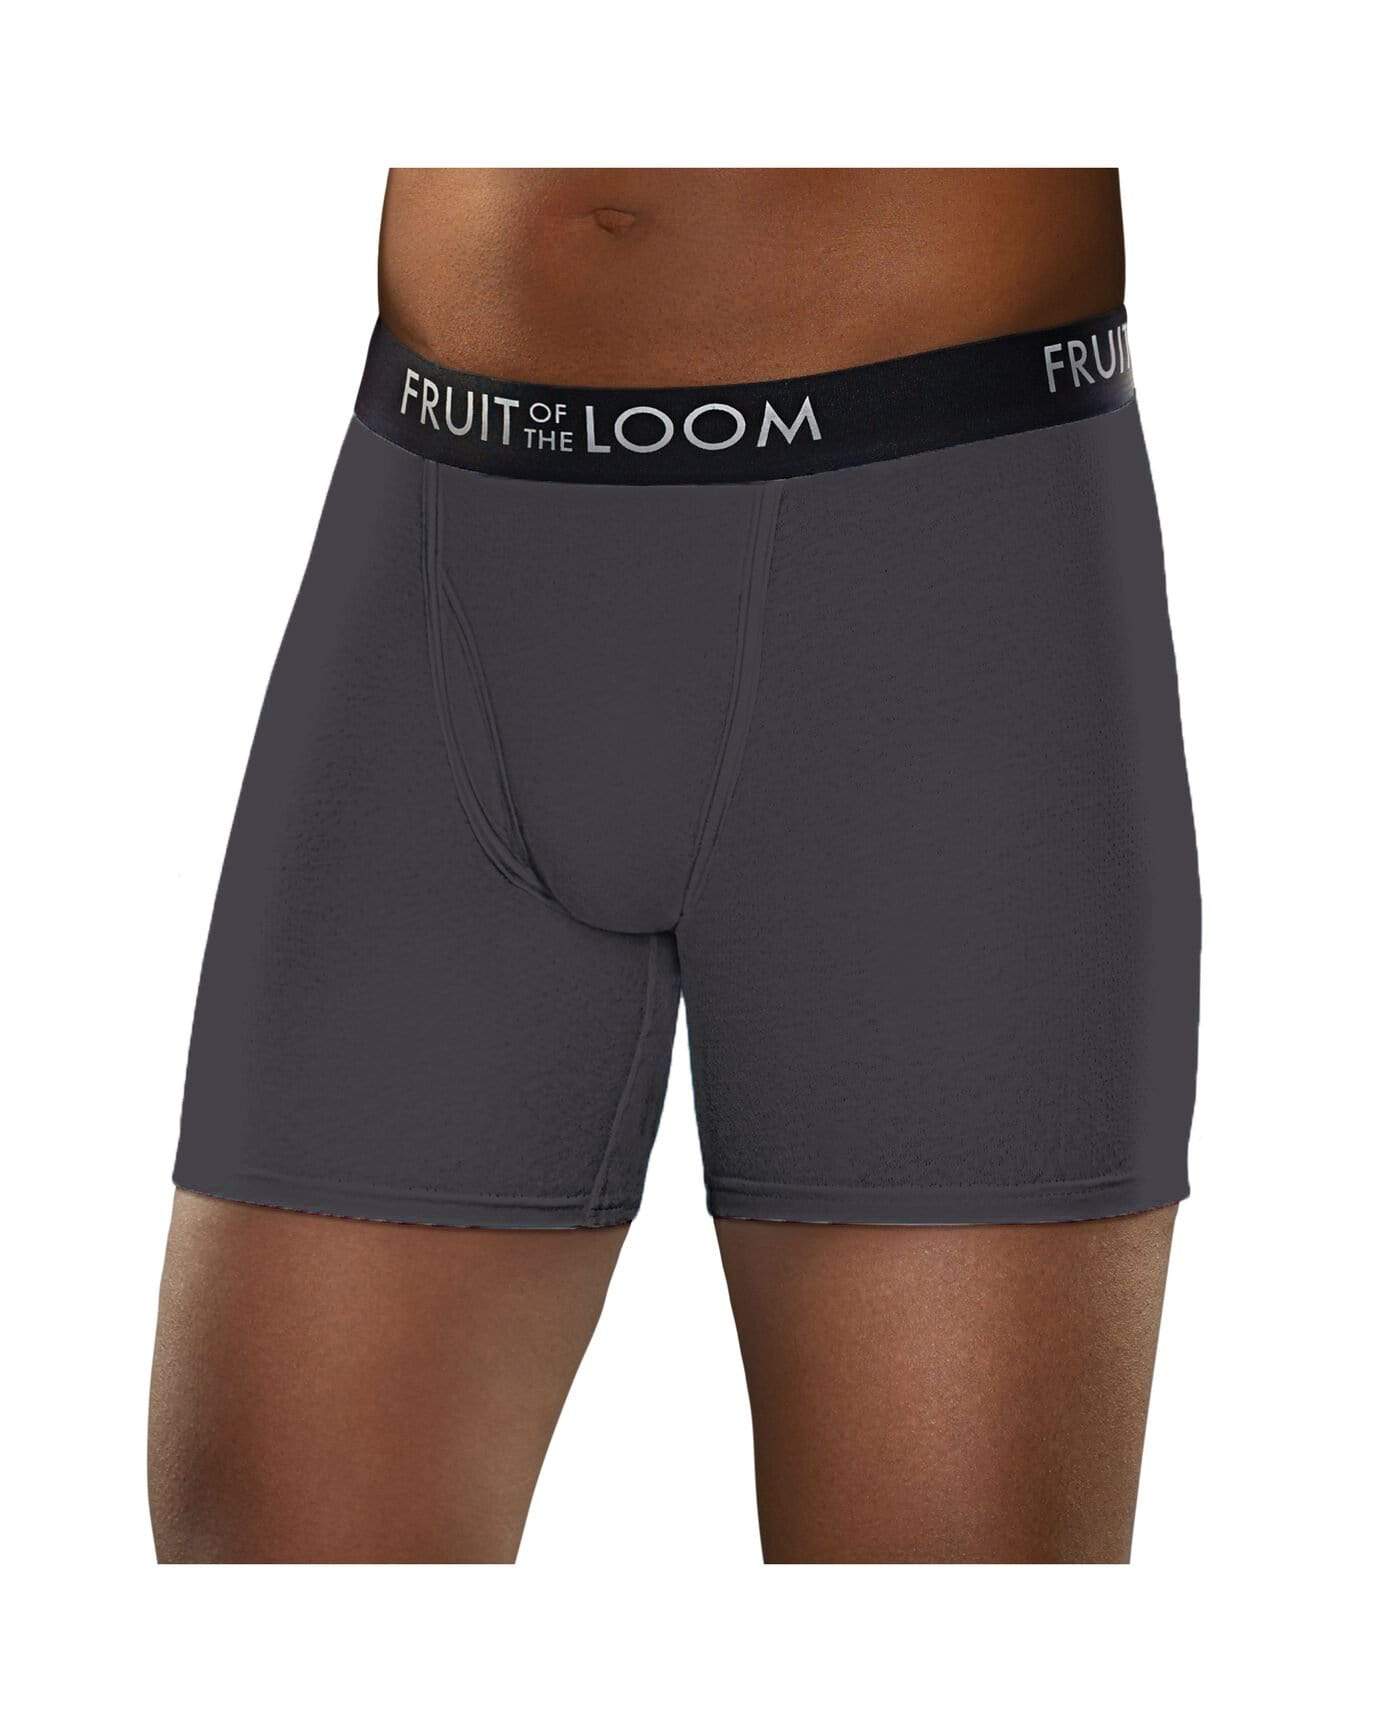  Fruit Of The Loom Mens Breathable Underwear Briefs